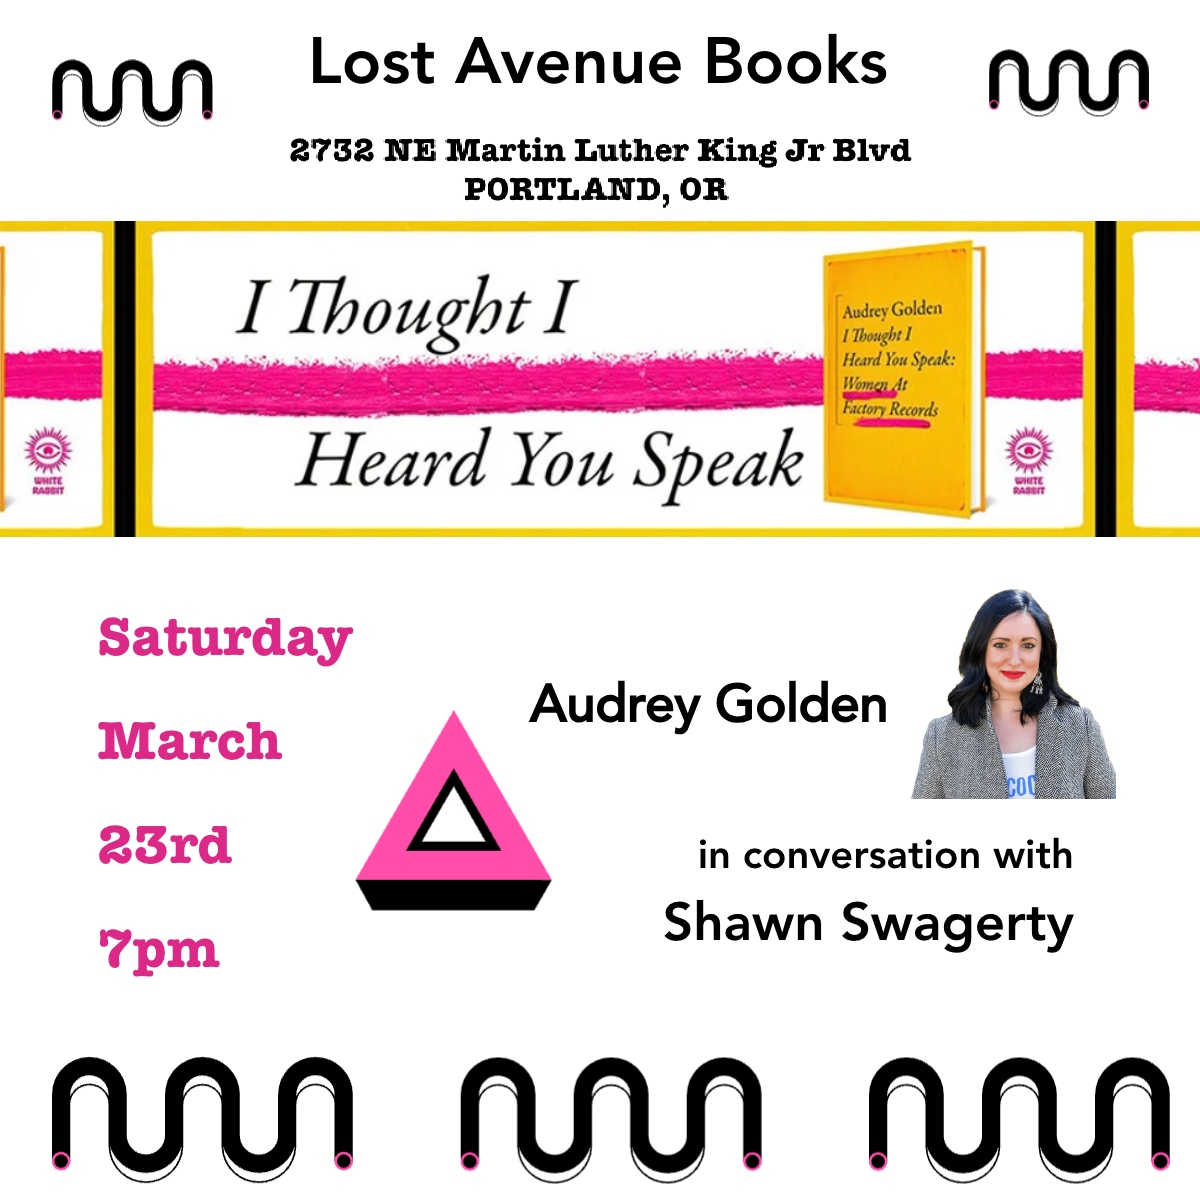 Seattle + Portland, I'm coming to you in less than a week to celebrate the women of Factory Records in I THOUGHT I HEARD YOU SPEAK. Join me for in-conversation events and book signings in the Pacific NW March 21 + 23! @WhiteRabbitBks @HachetteUK @HachetteUS @orionbooks